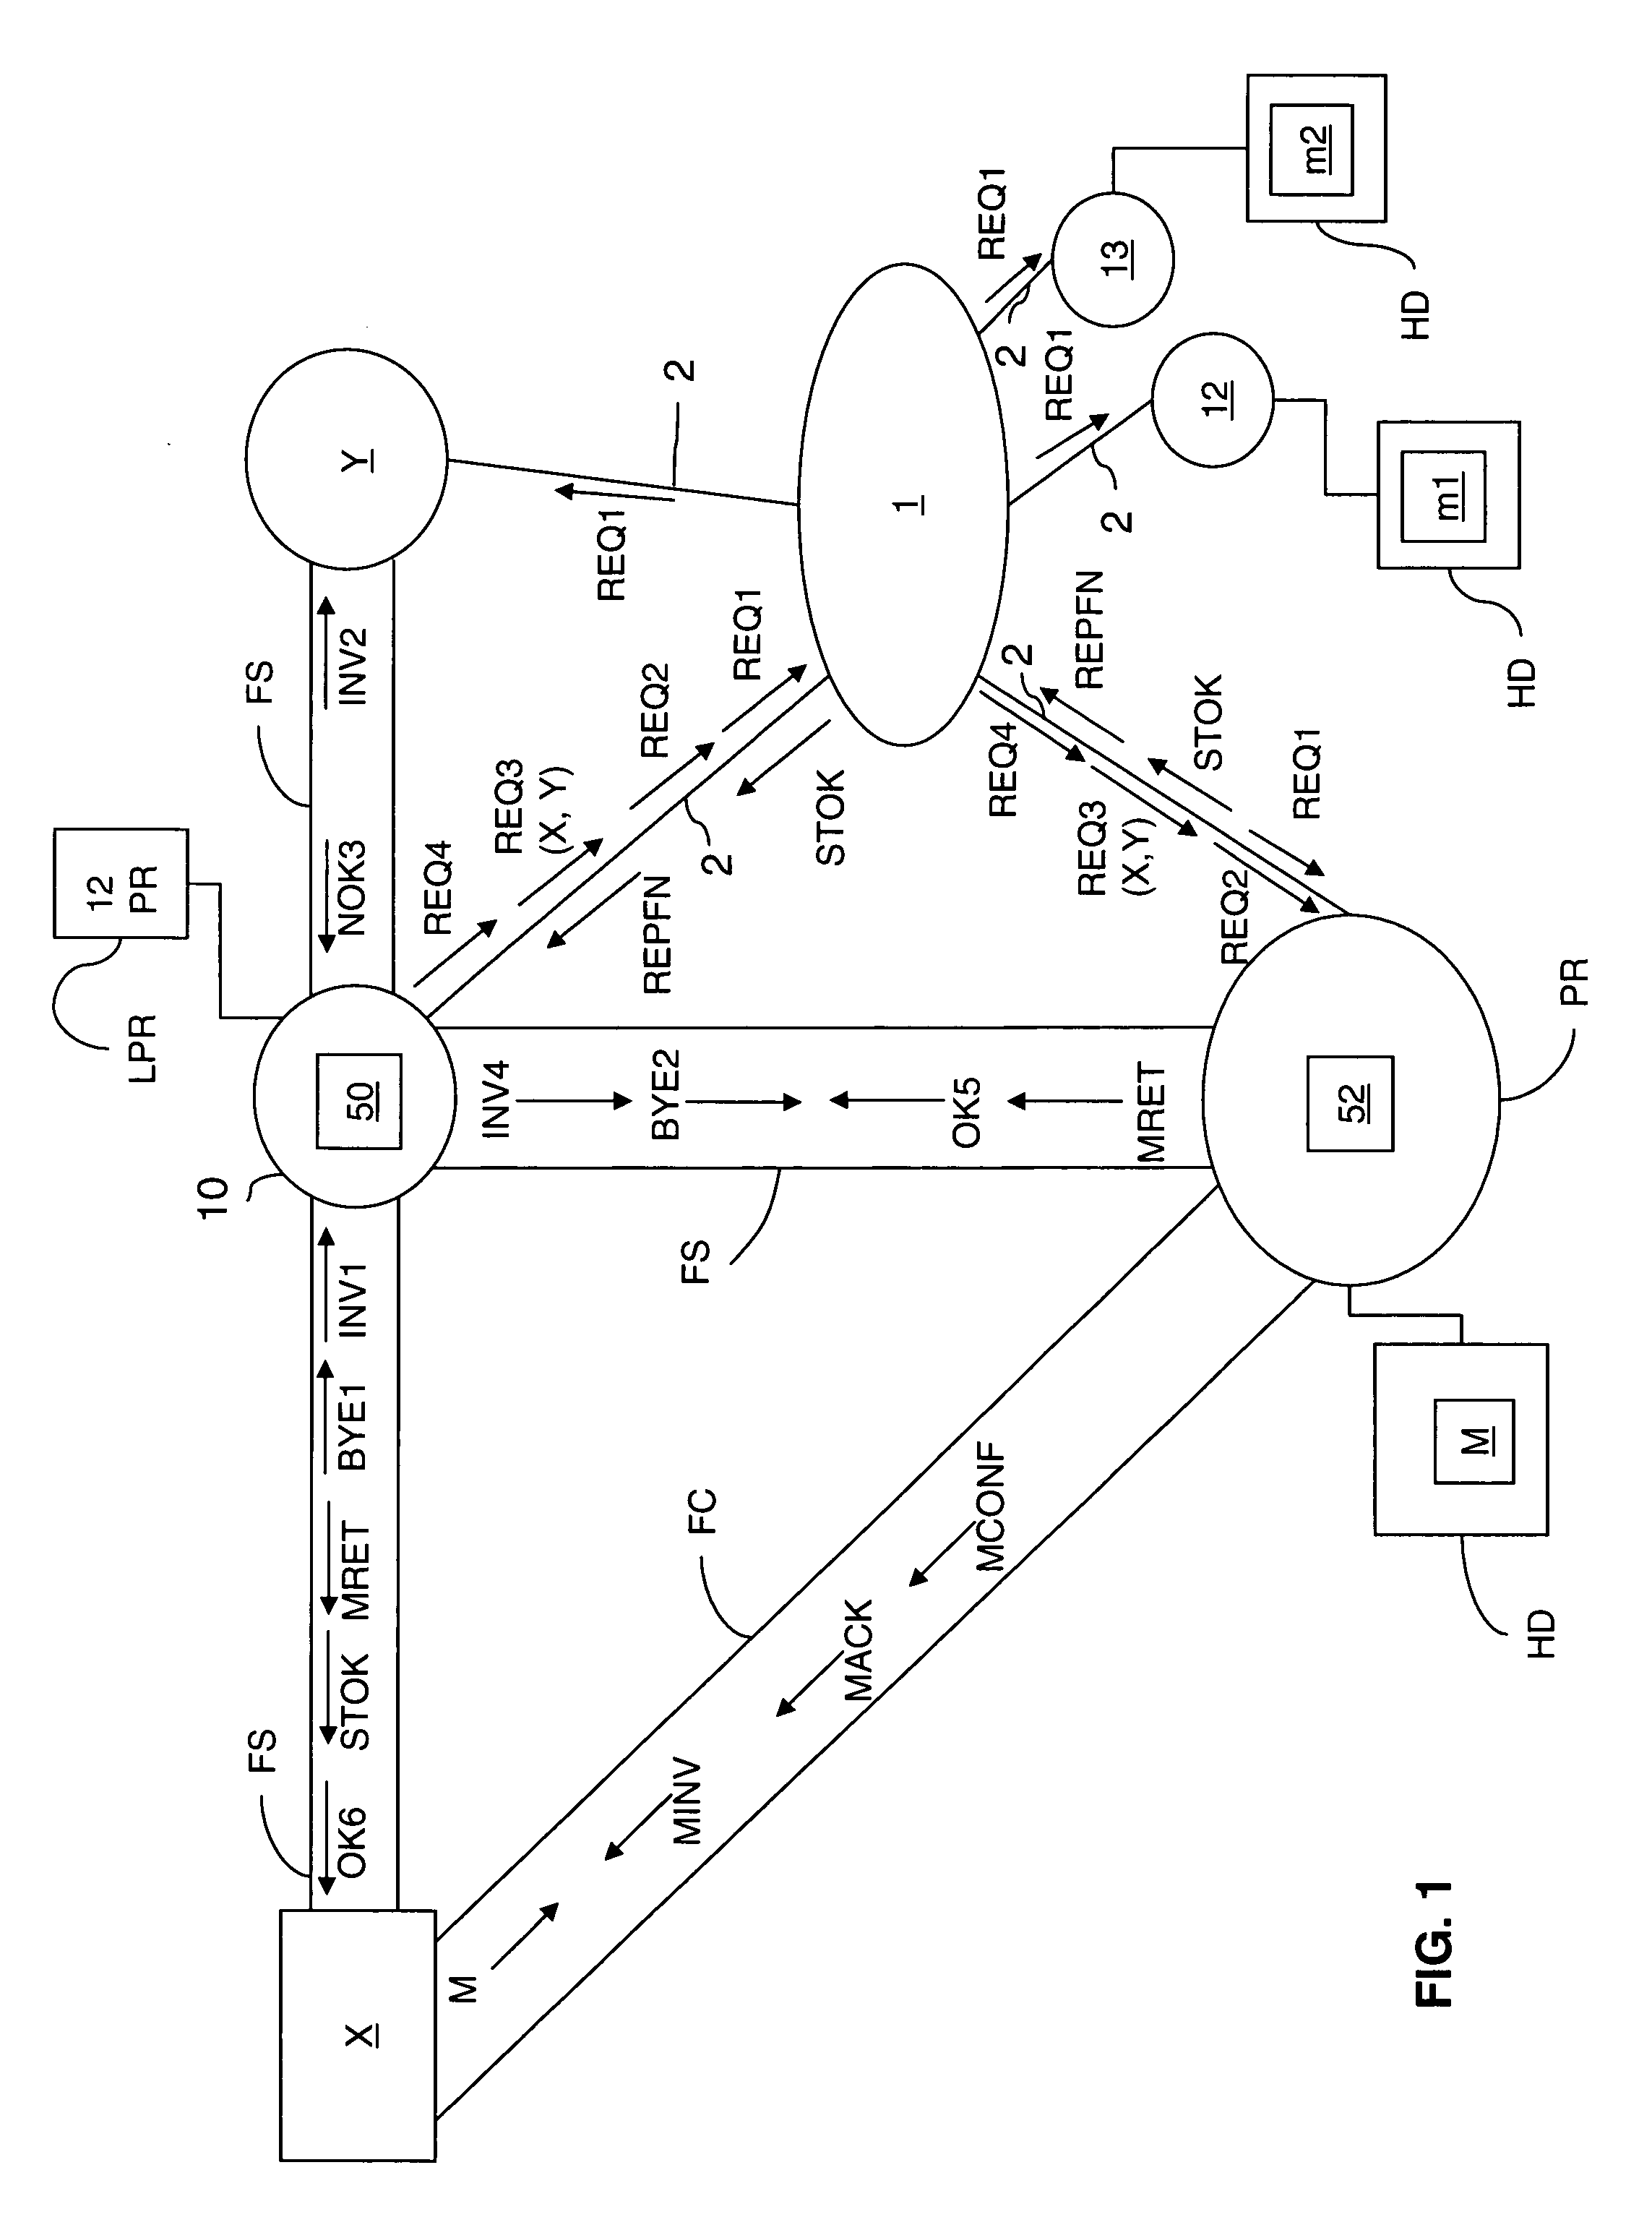 Method for Managing Messages In a Peer-To-Peer Network